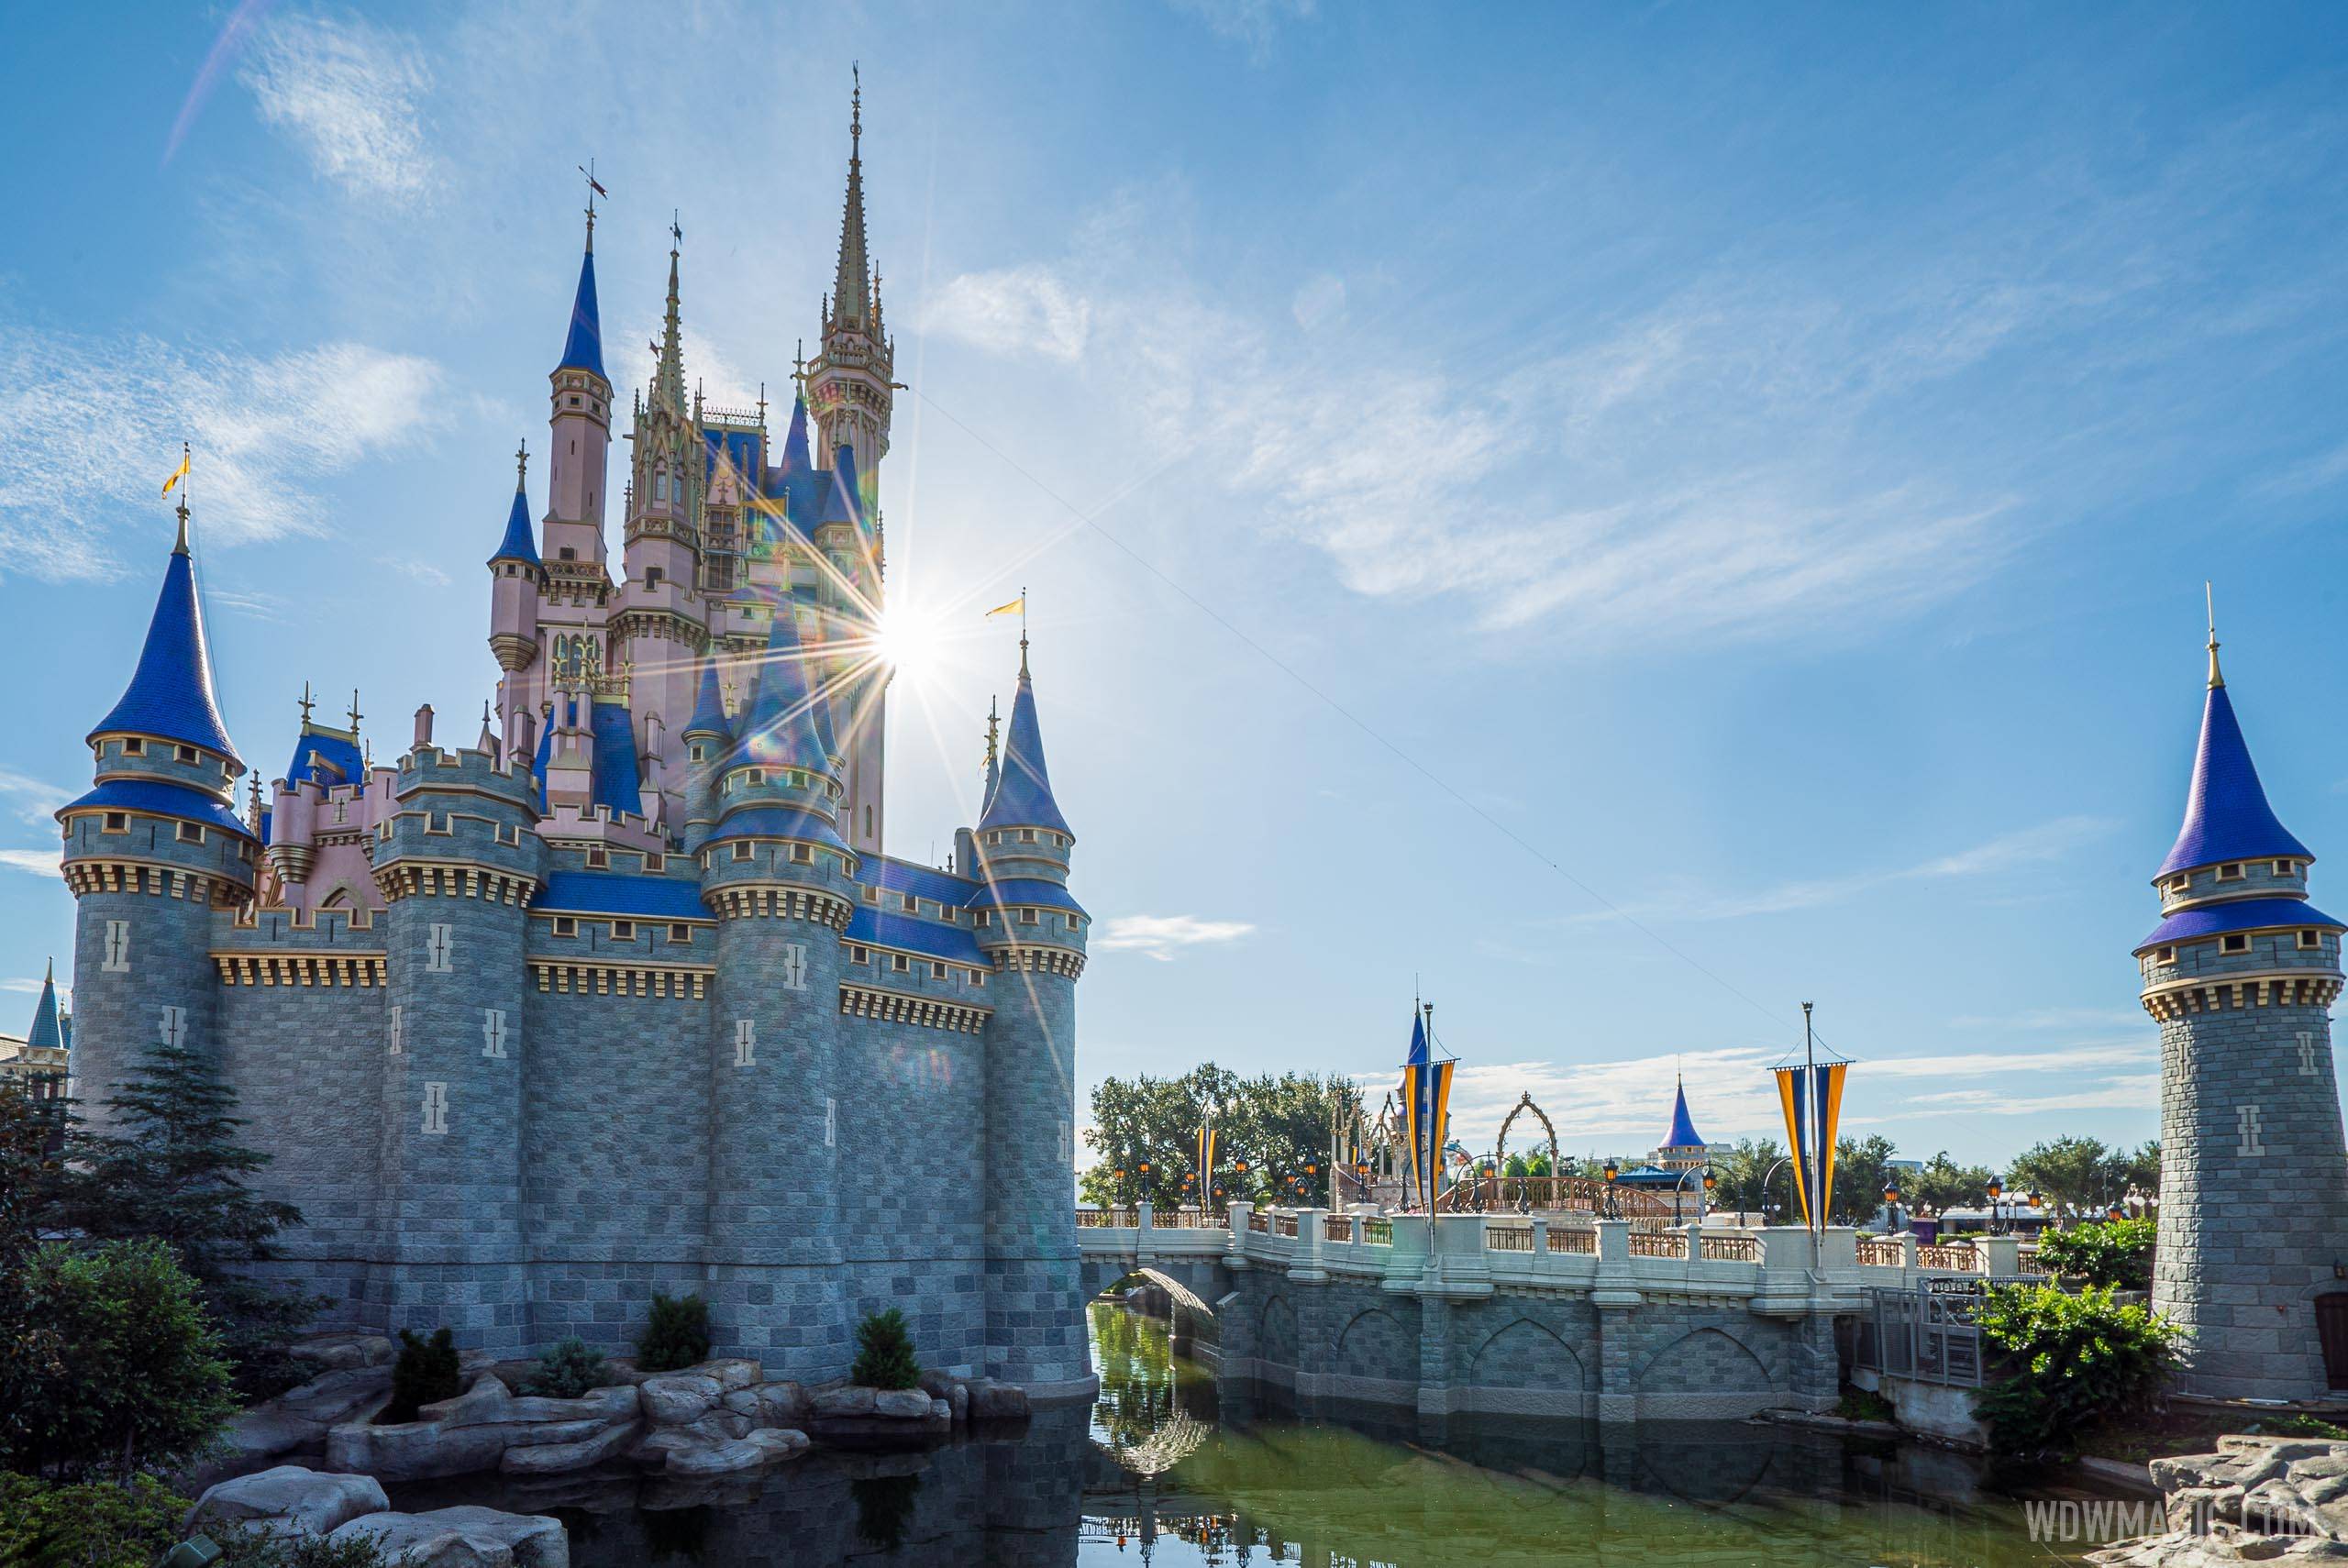 Crane on site beginning this weekend for Cinderella Castle Dream Light removal